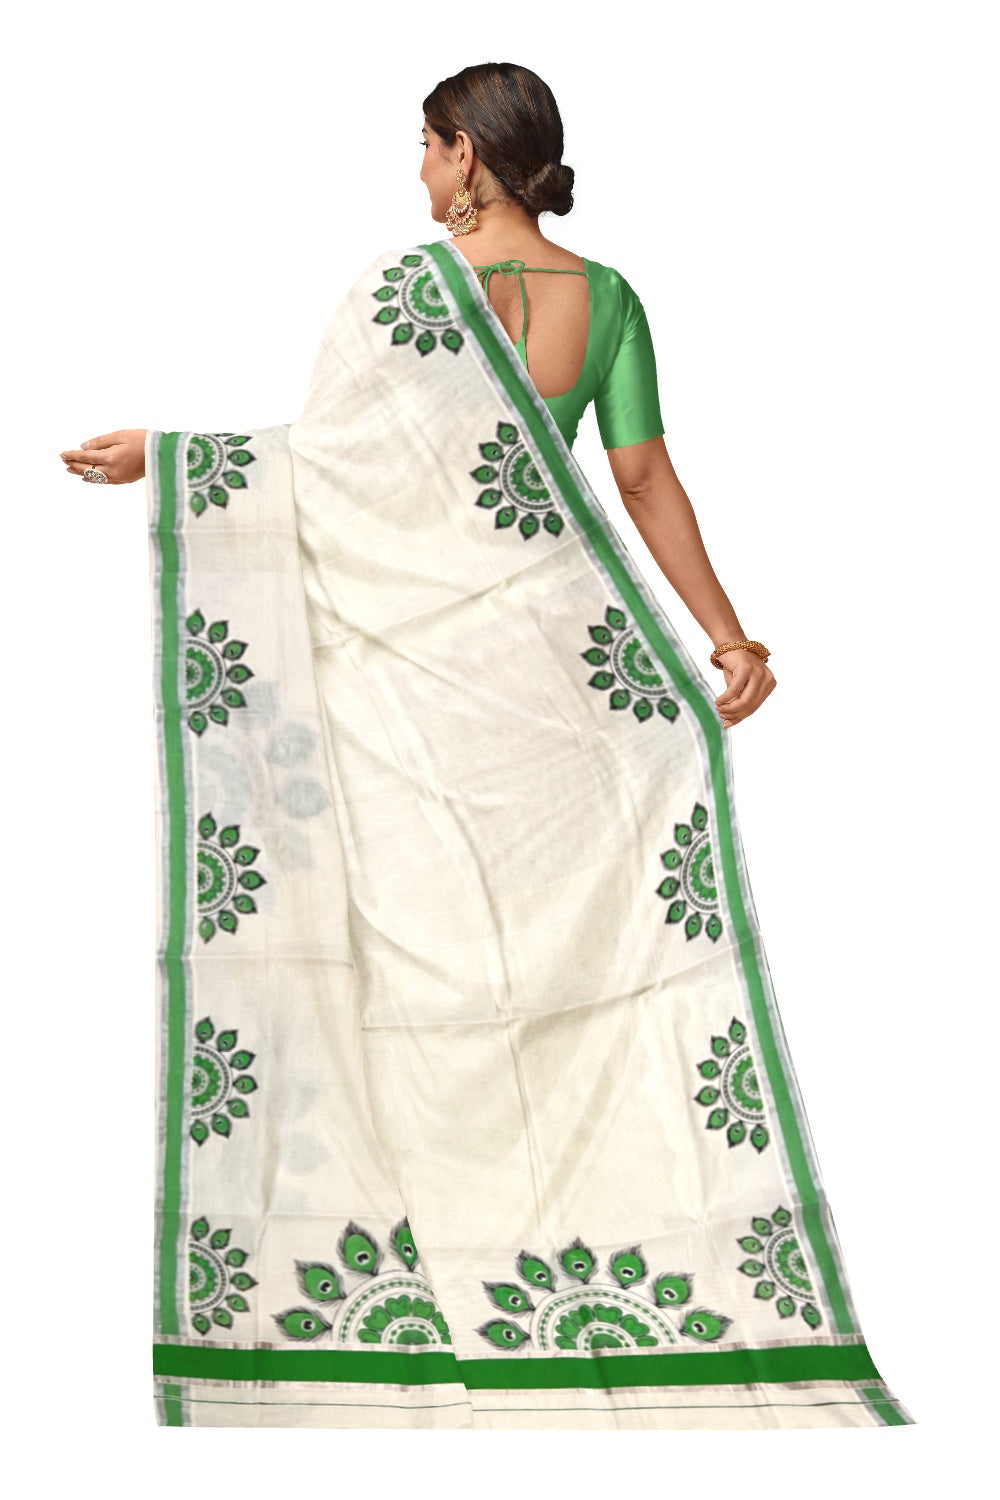 Pure Cotton Kerala Saree with Mural Printed Light Green Feather Semi Circle in Light Green and Silver Kasavu Border